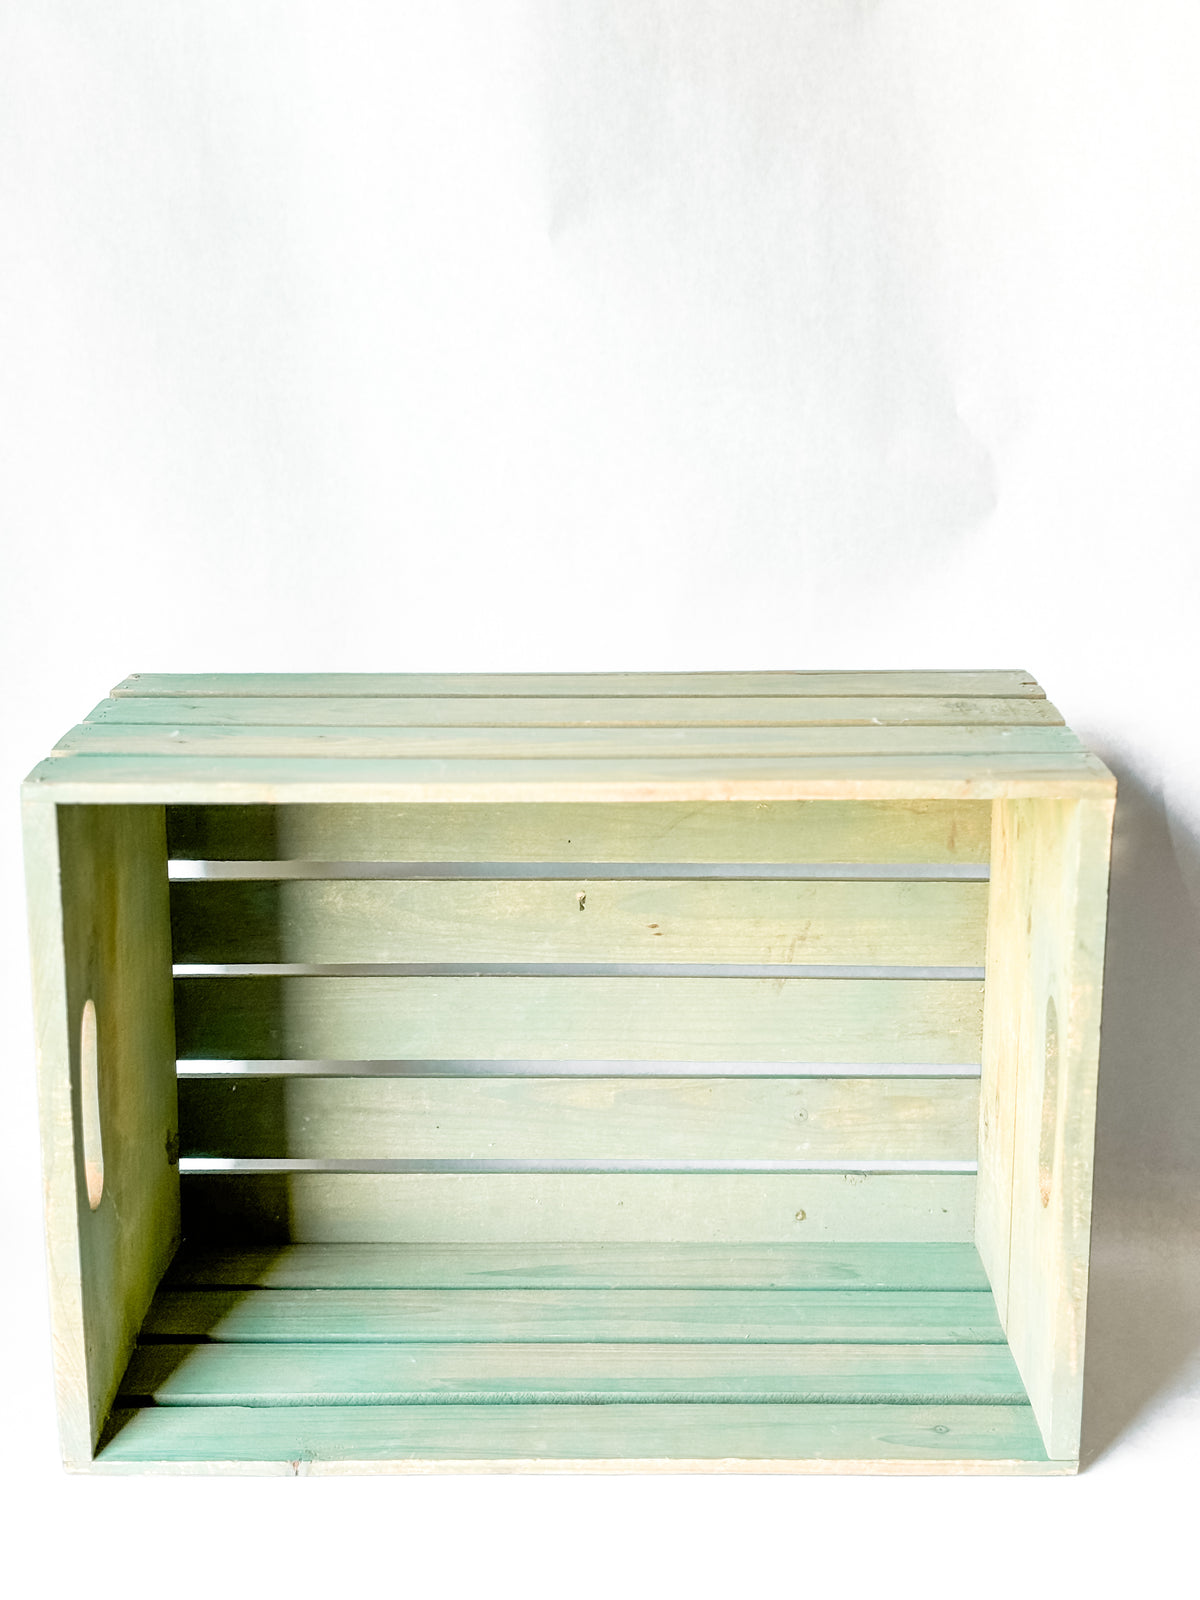 Green Wooden Crate